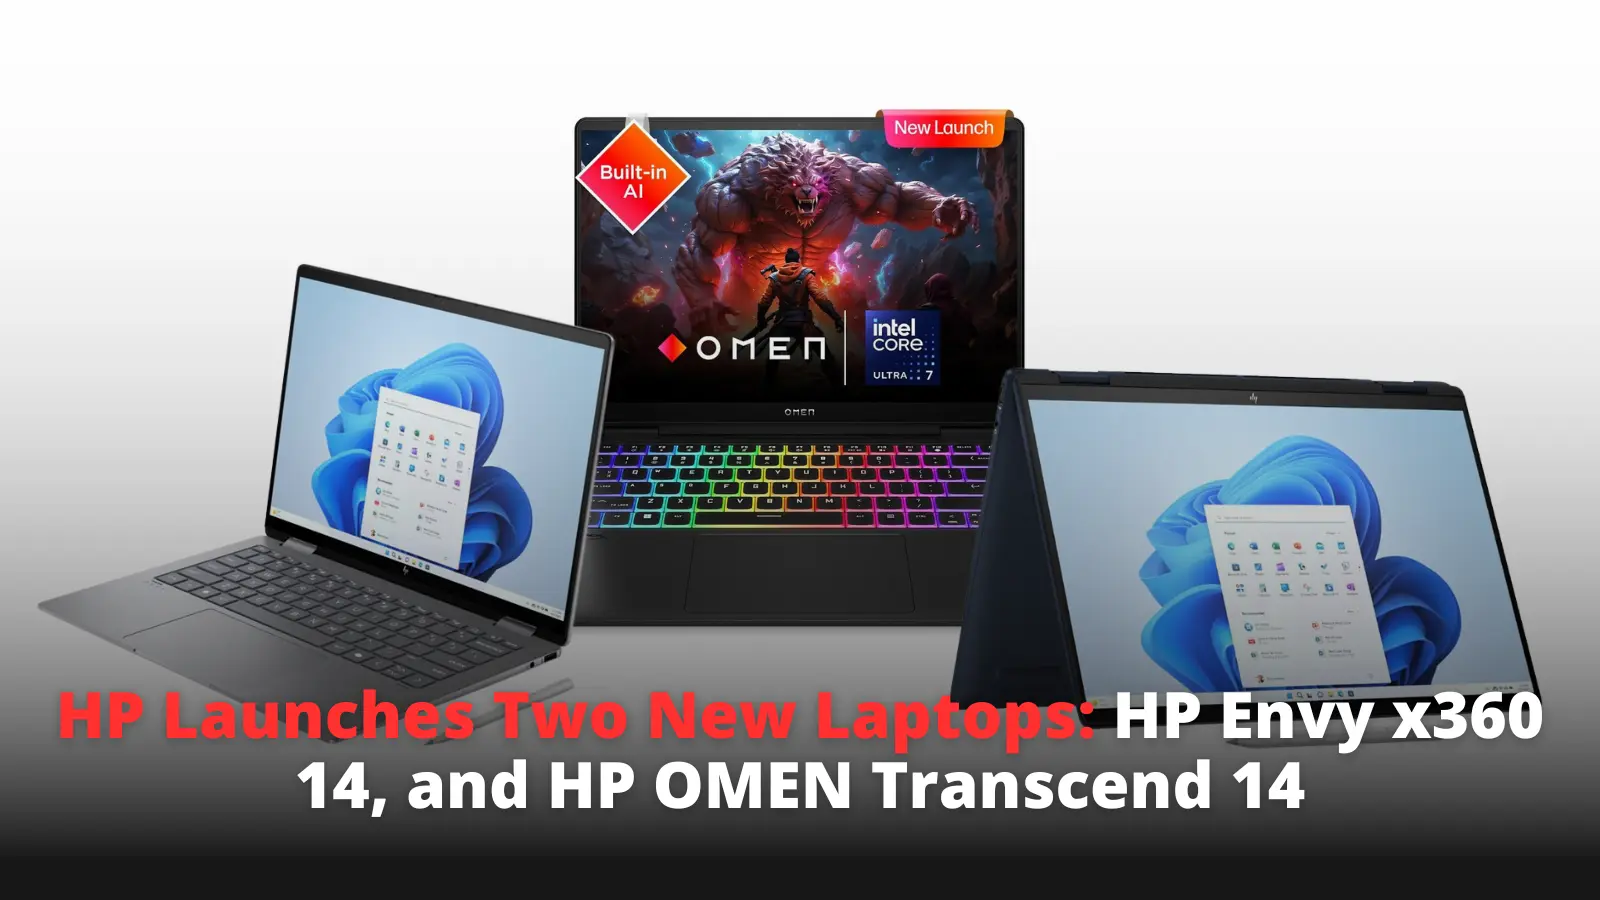 HP Envy x360 14 and HP OMEN Transcend 14